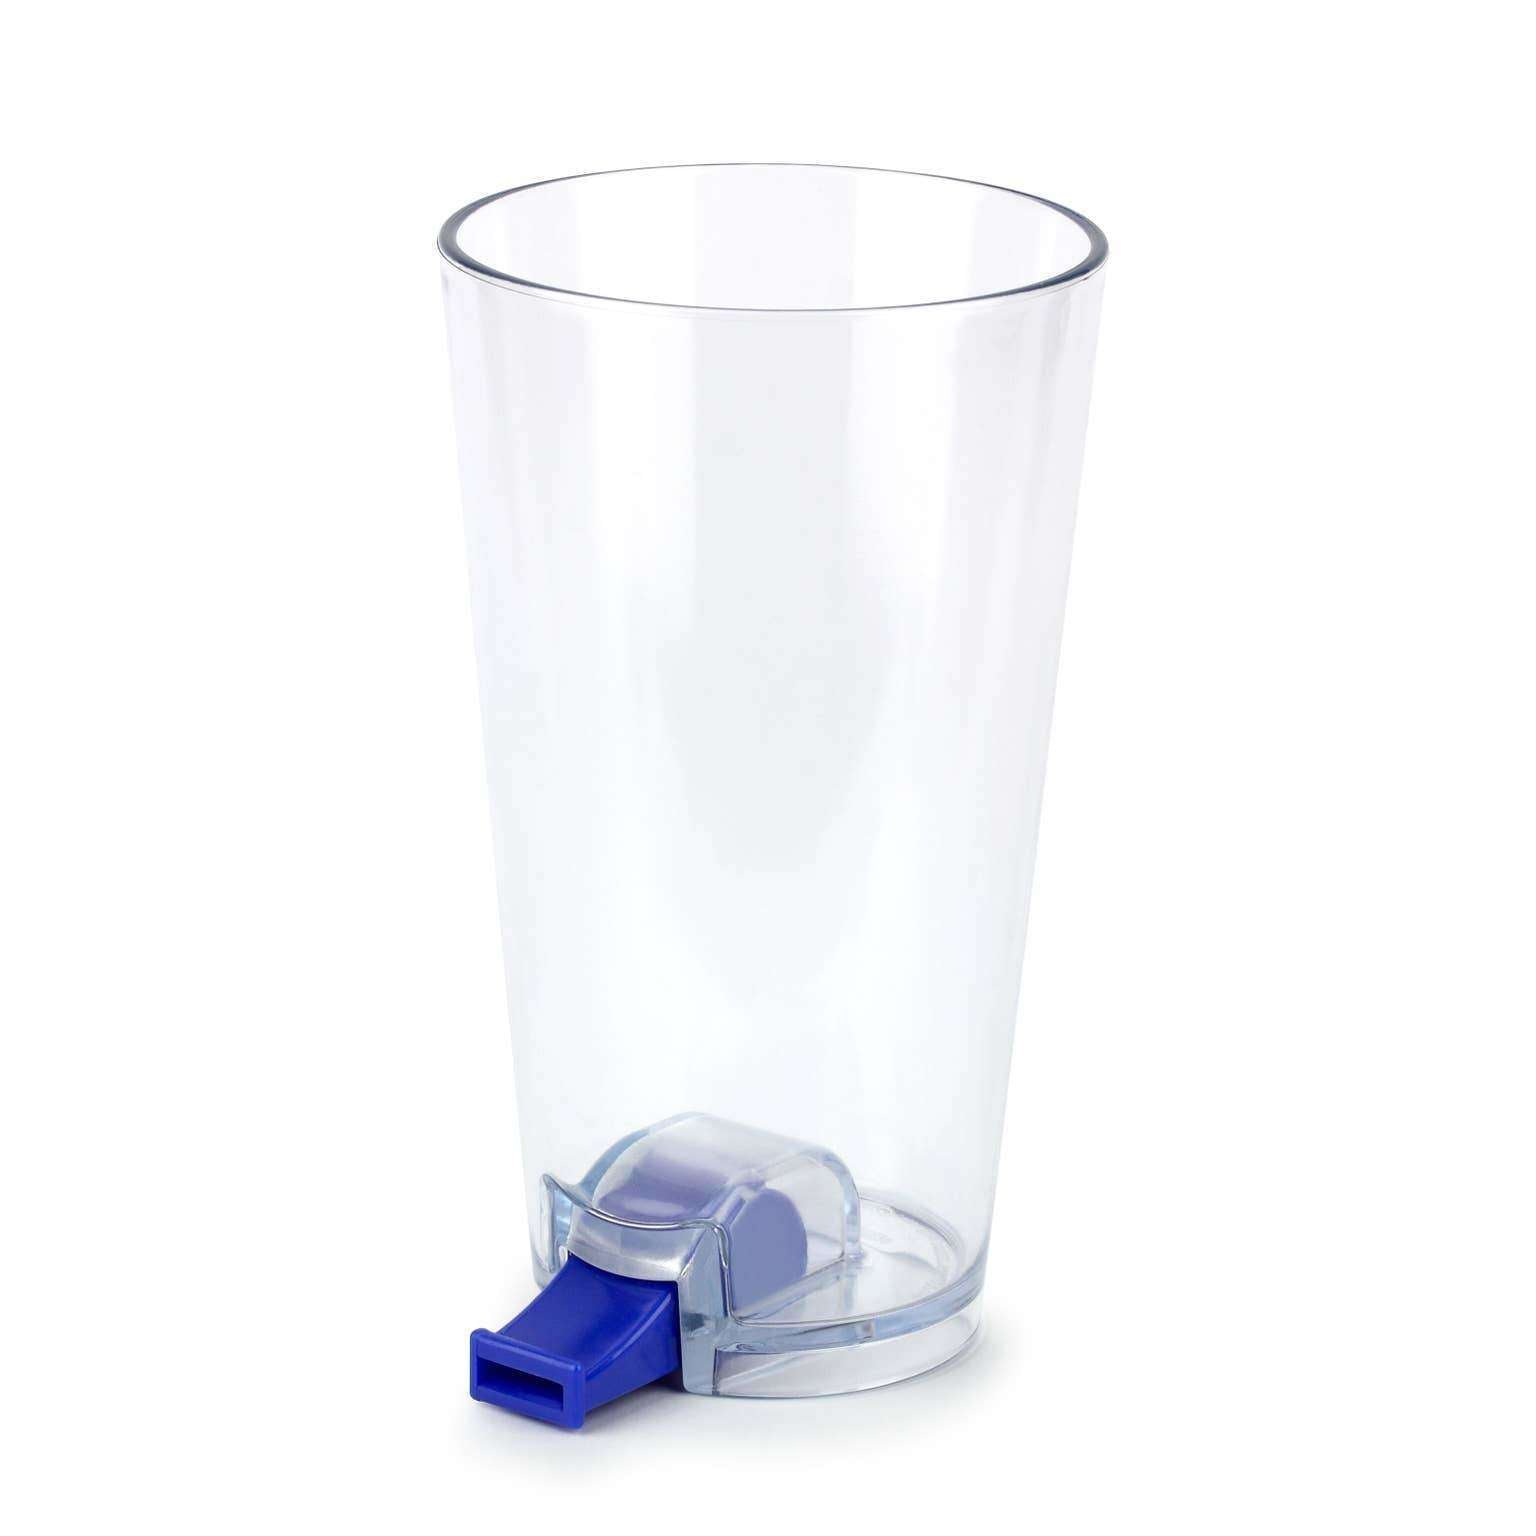 Wet My Whistle Pint Glass w/ Built In Party Whistle